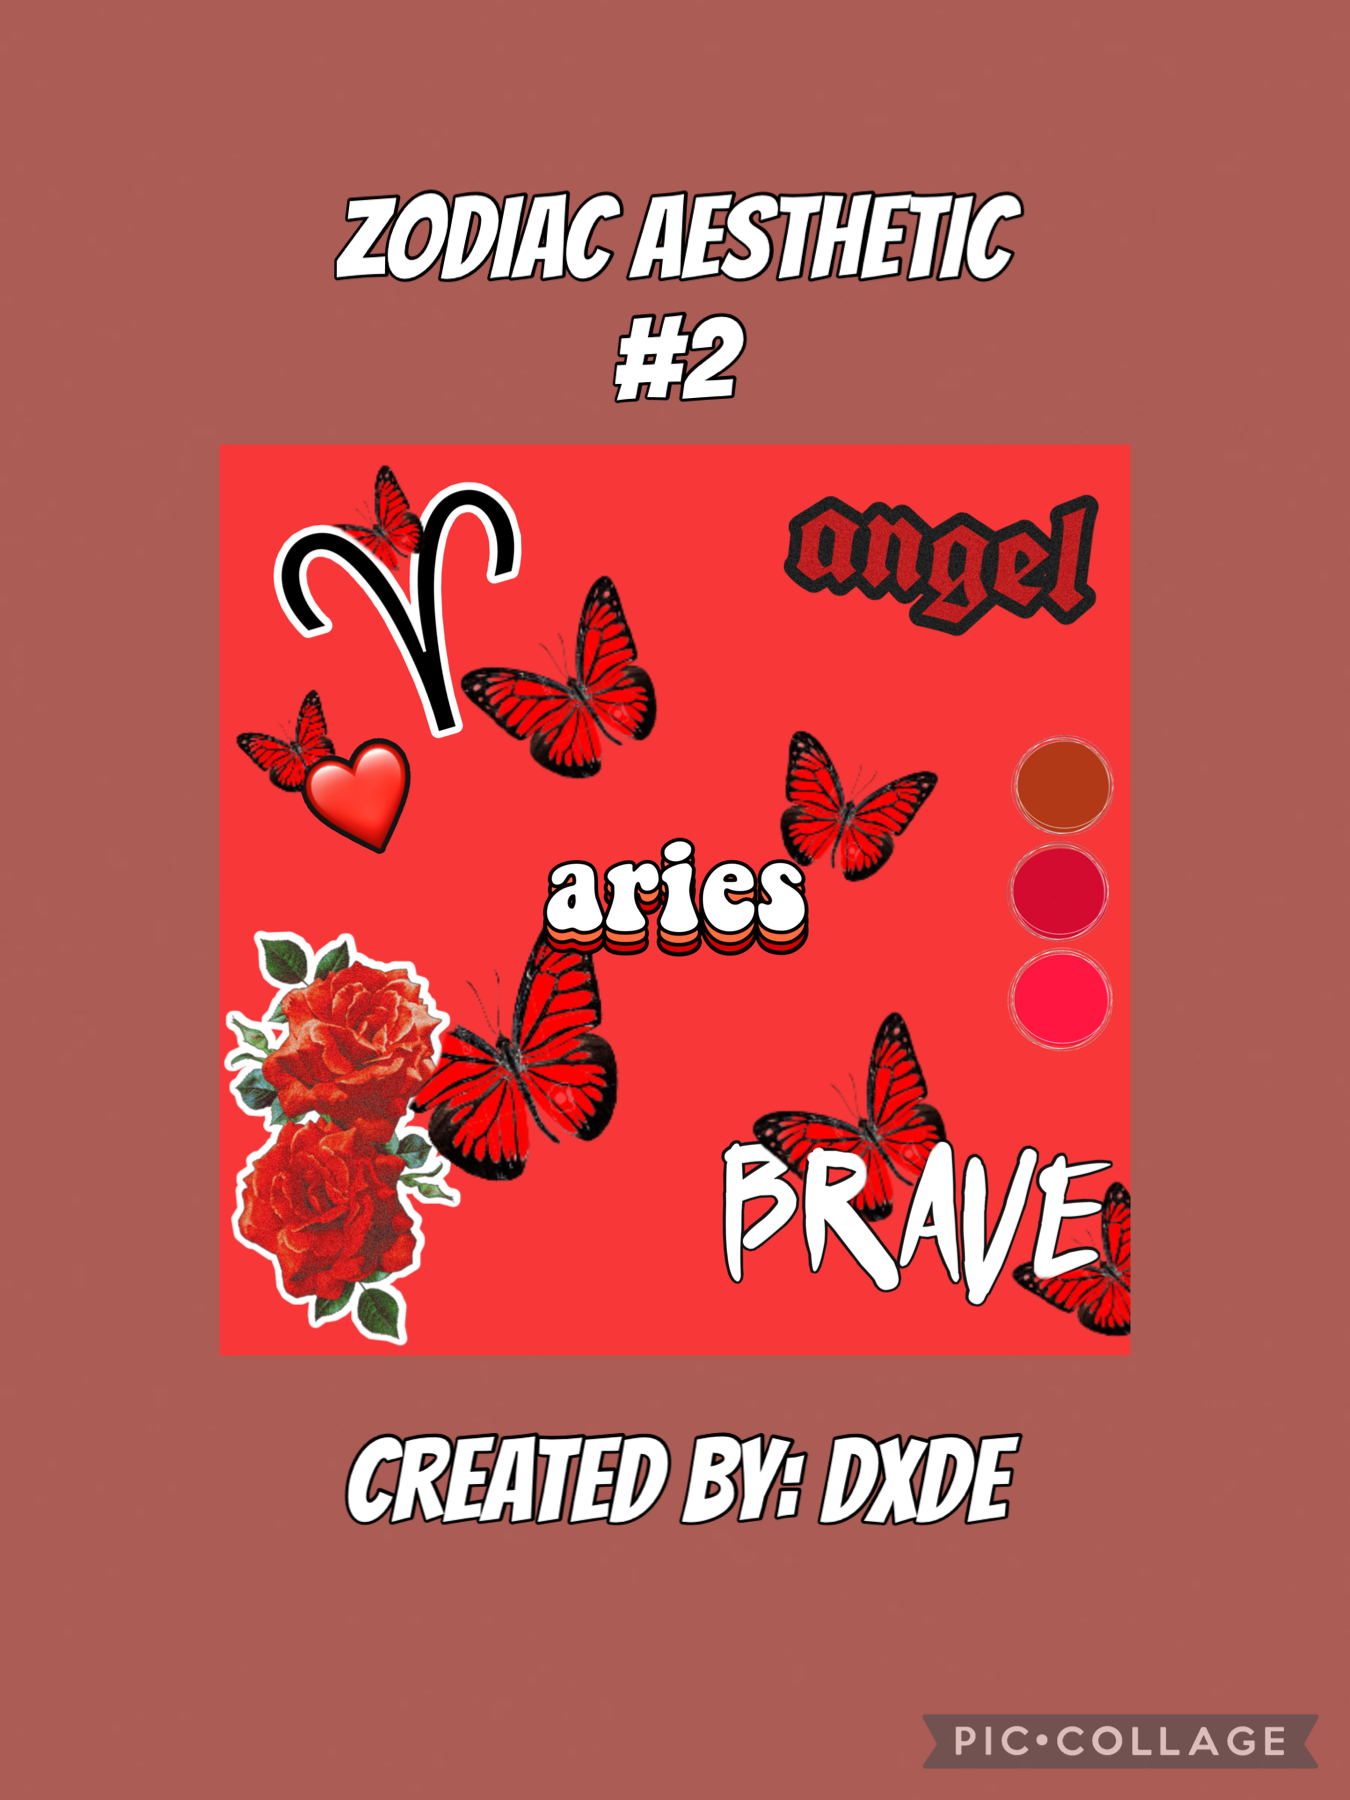 Enjoy this Aesthetic, Different Zodiacs coming soon!
#aries♈️